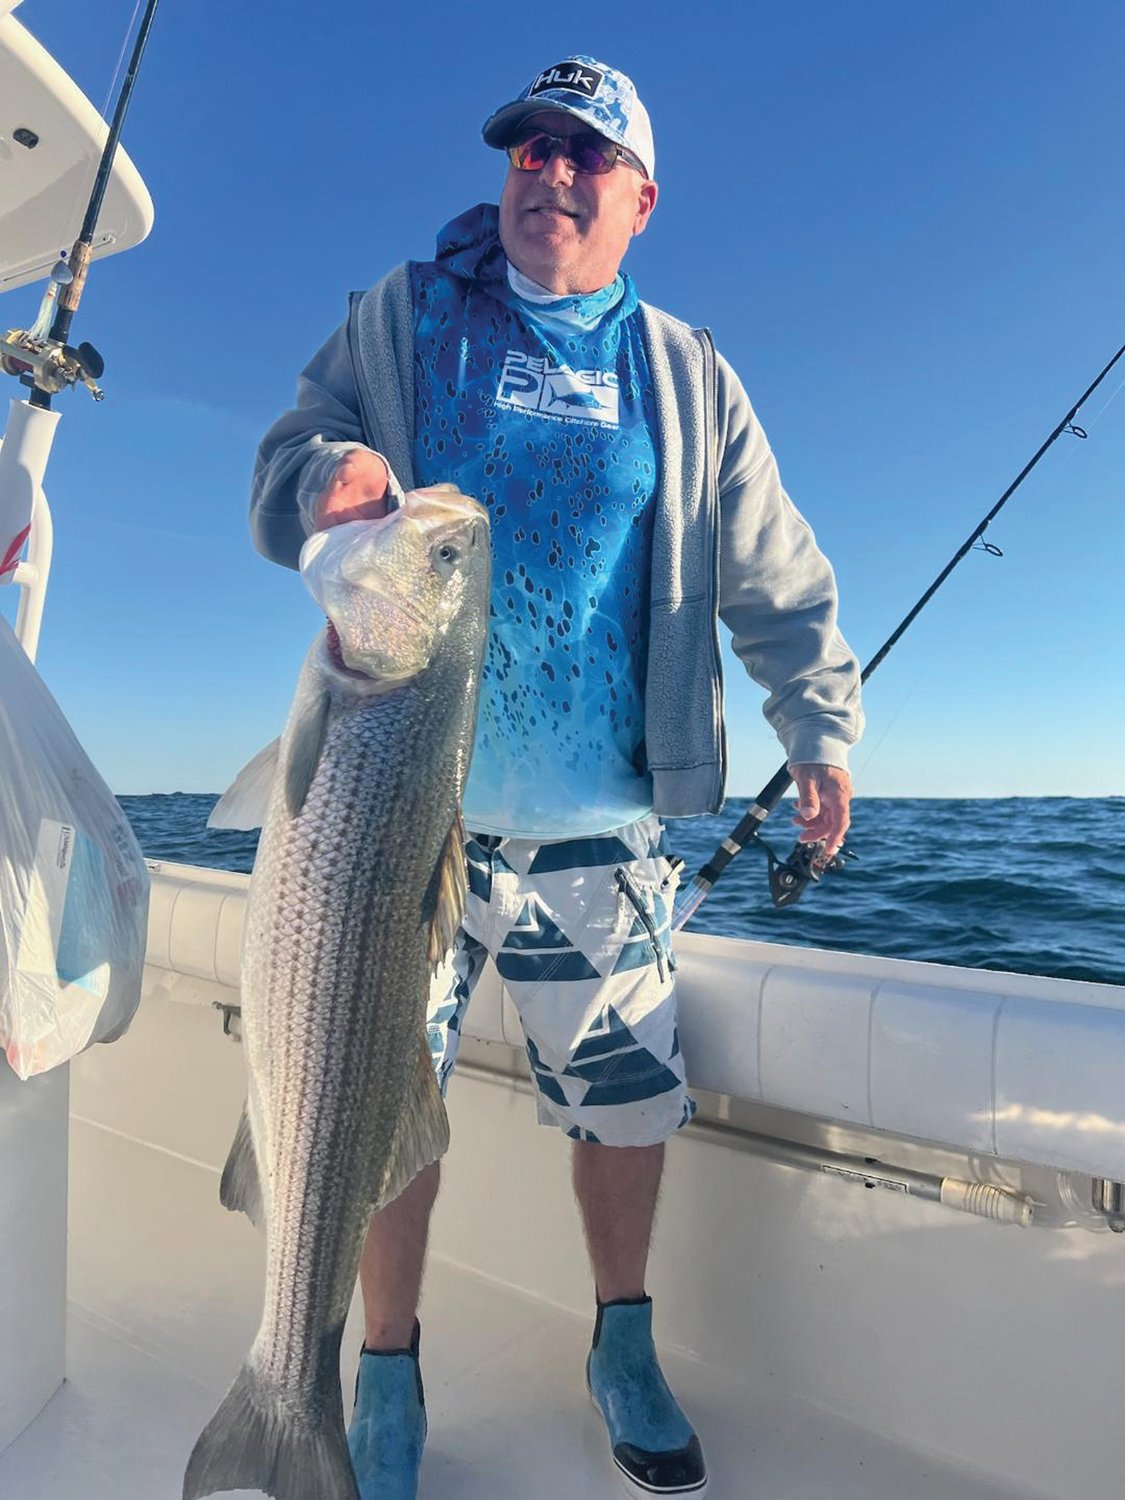 STRIPED BASS: Peter Johnson of Connecticut caught this striped bass while fluke fishing at Block Island. Peter said, “I caught it on 15 pound braid line as I was set up to catch fluke (summer flounder).” (Submitted photo)